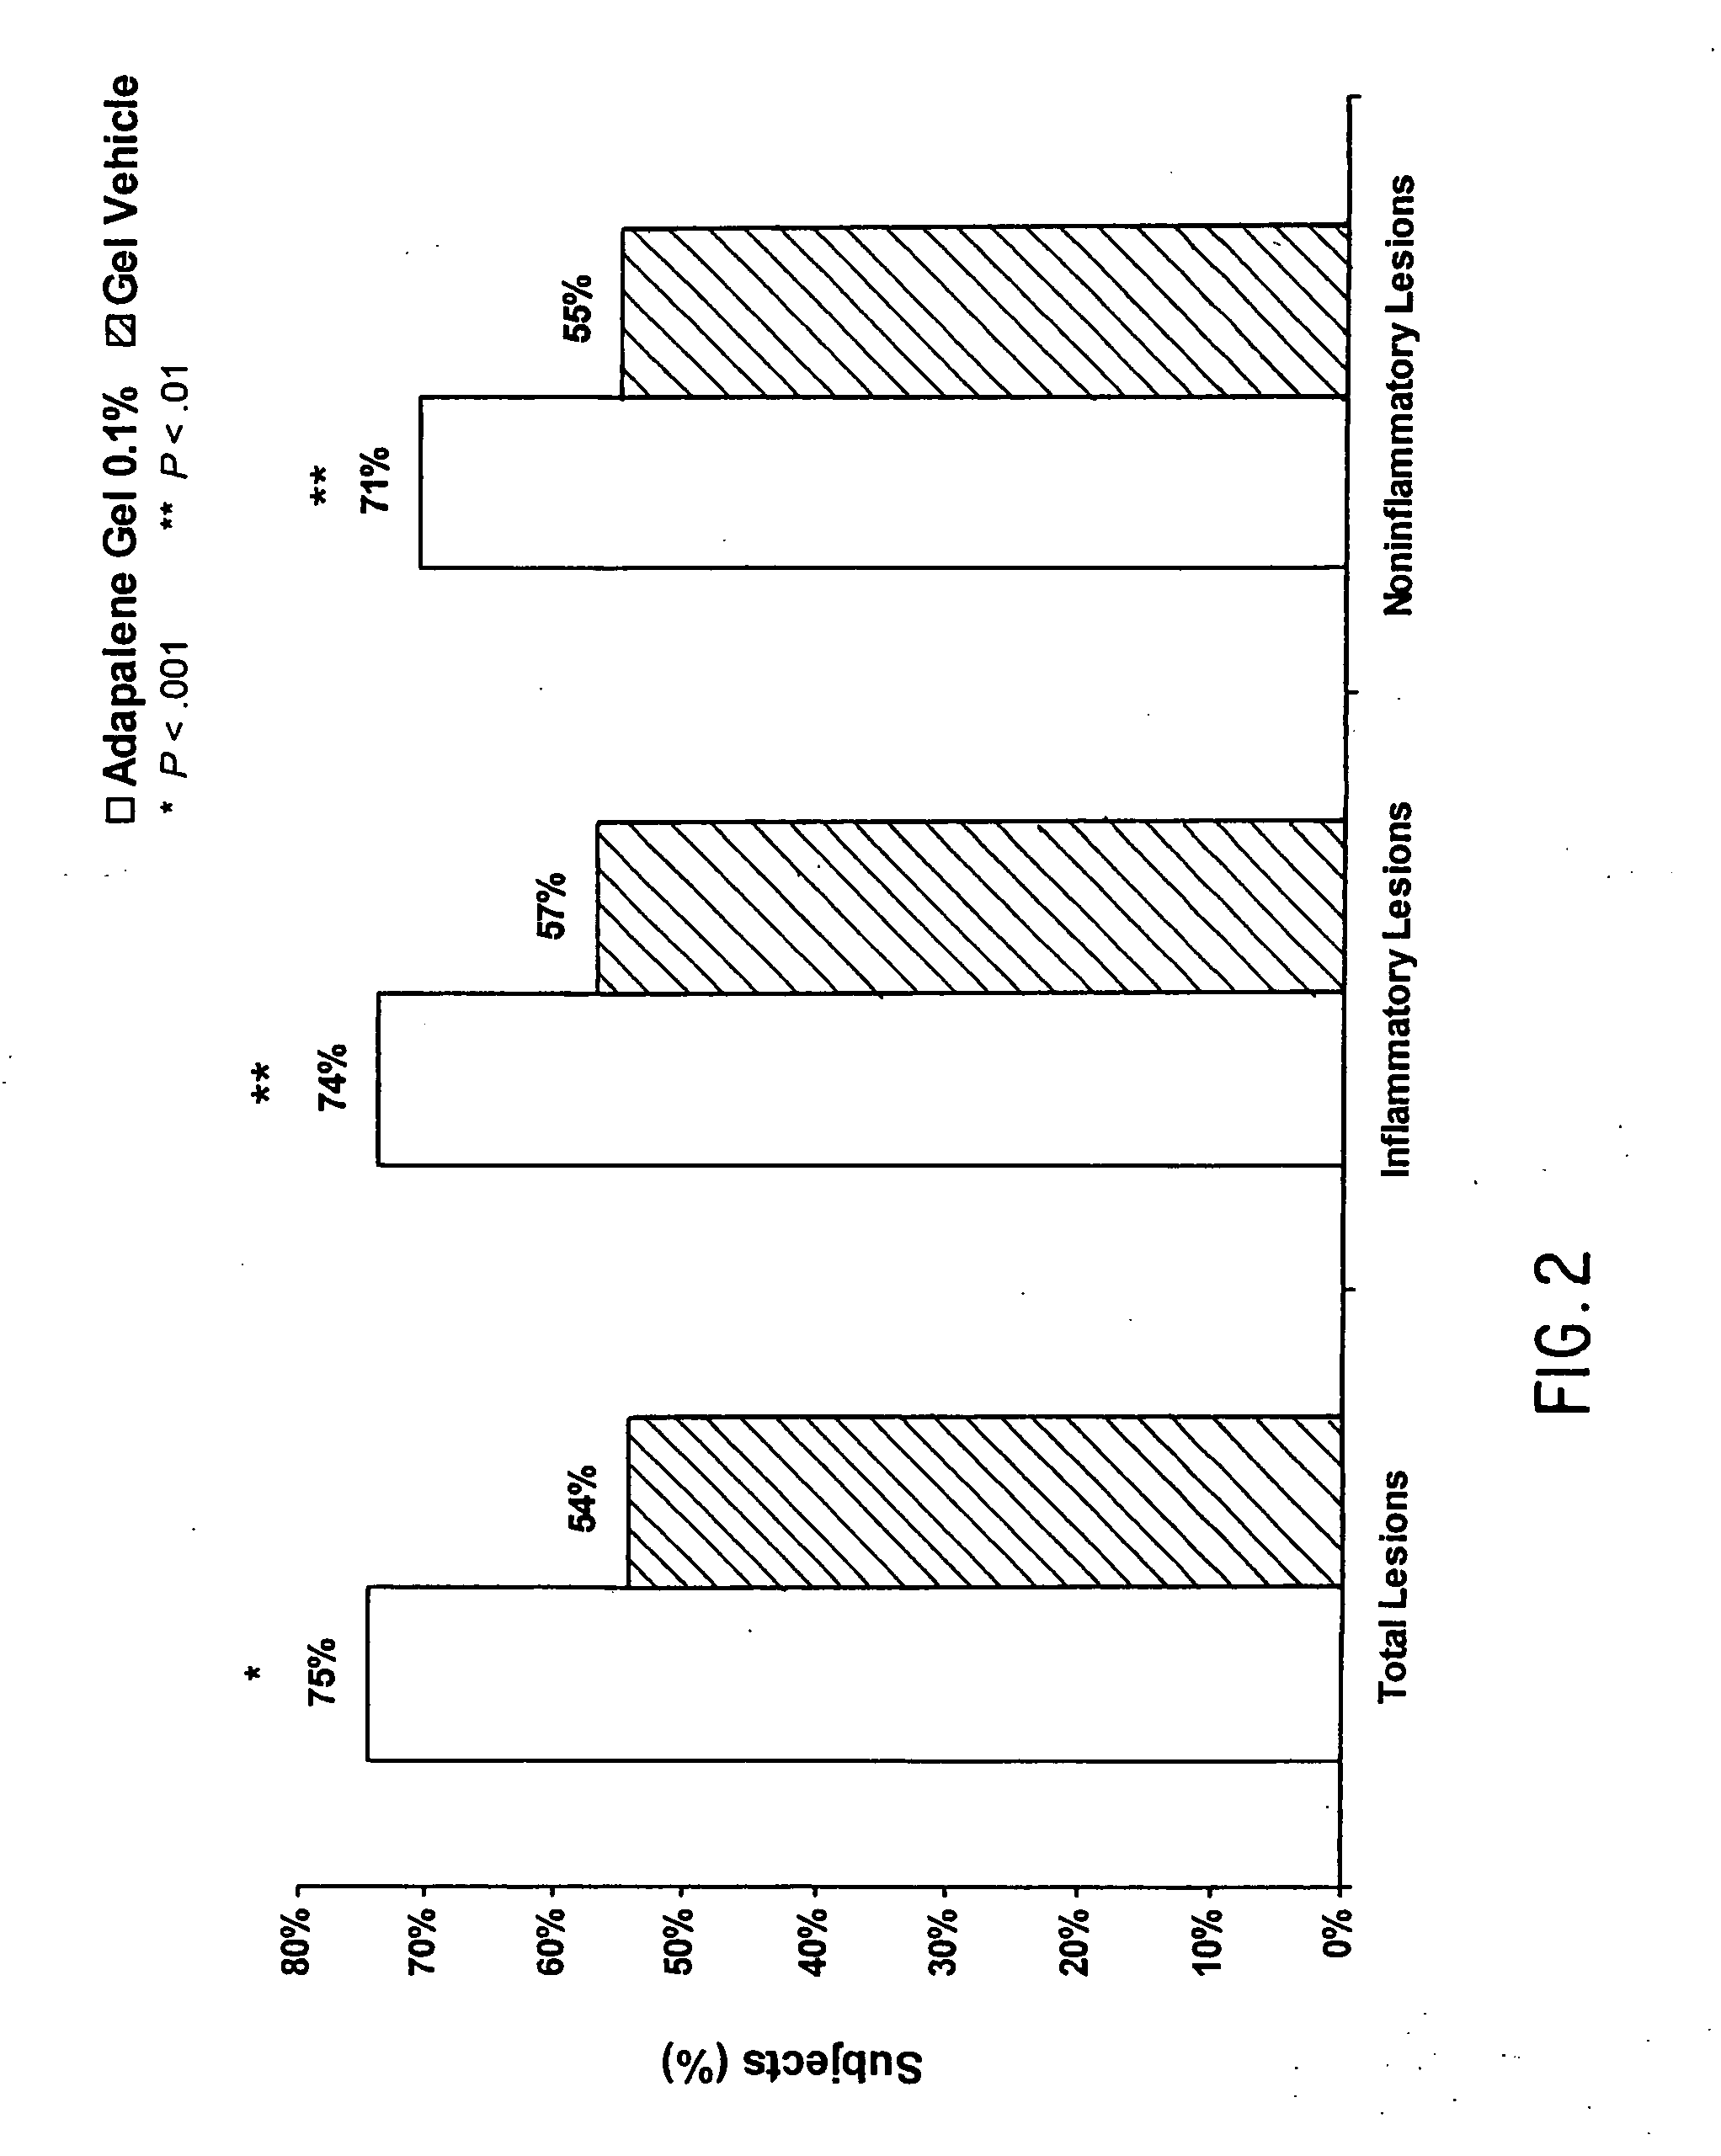 Method of Using Adapalene in Acne Maintenance Therapy